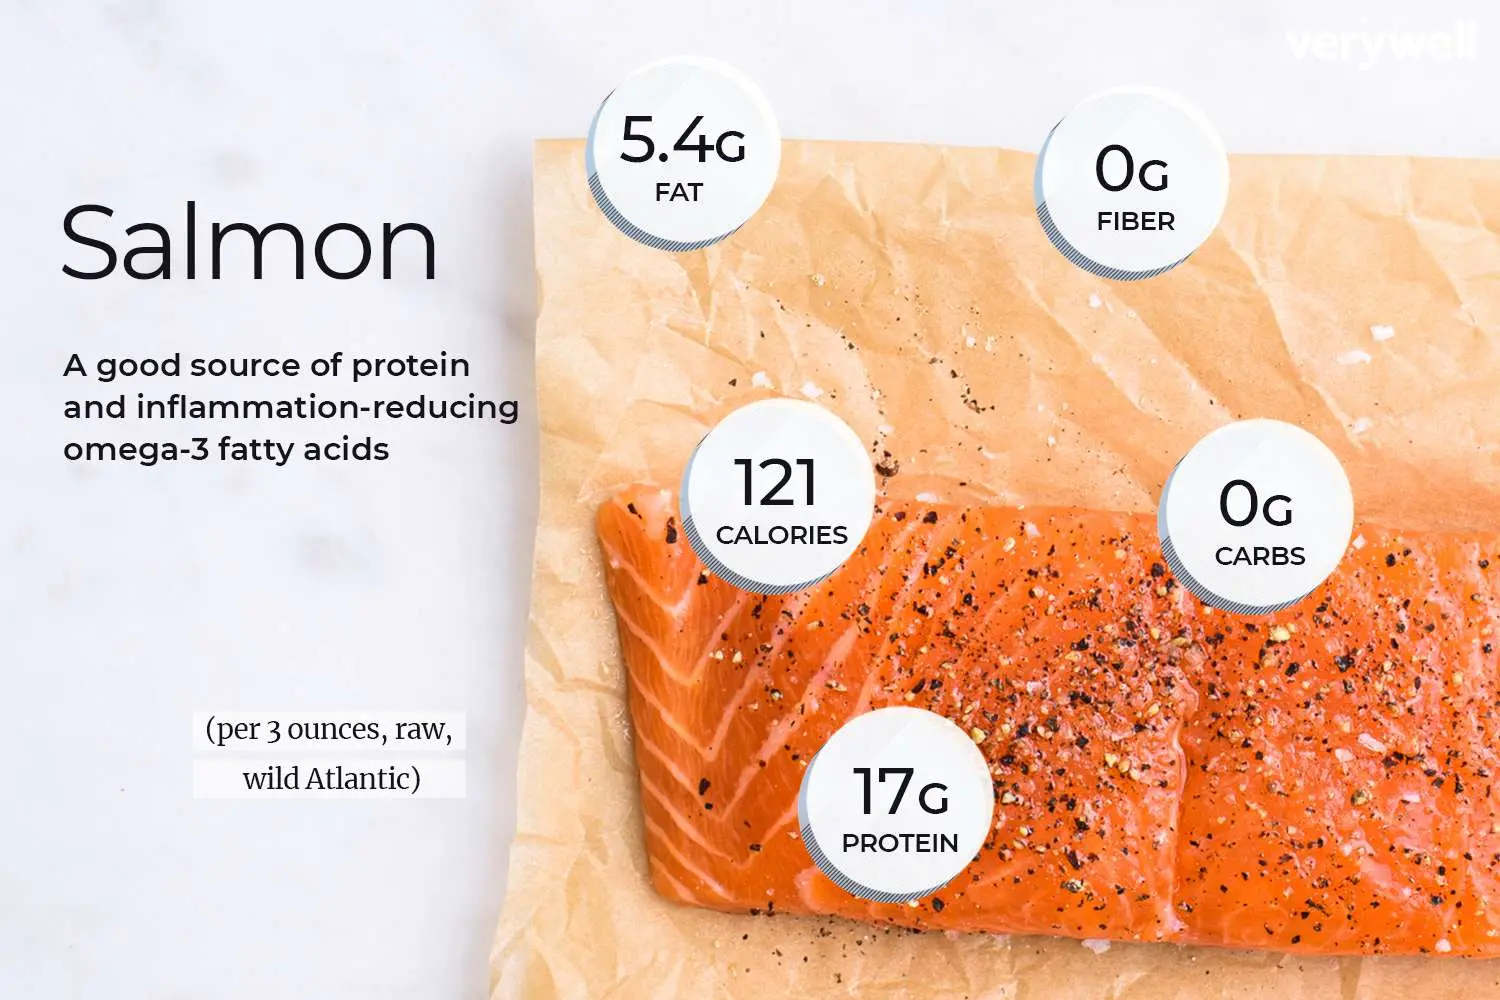 calories in smoked salmon fillet - How many calories in a 8 oz salmon fillet